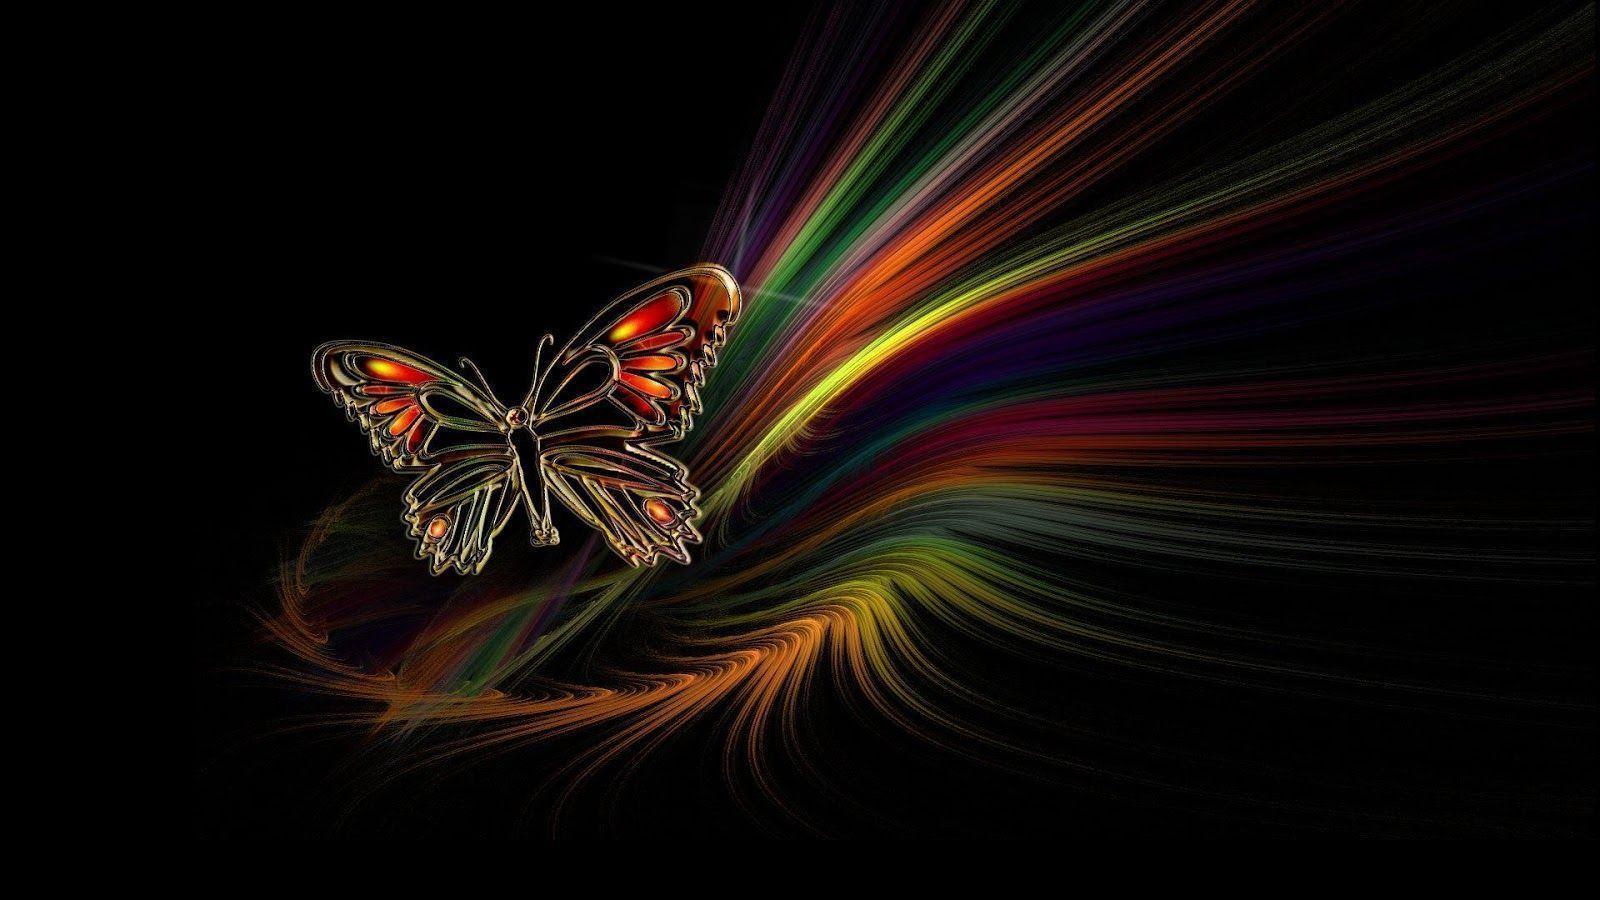 Abstract butterfly wallpapers